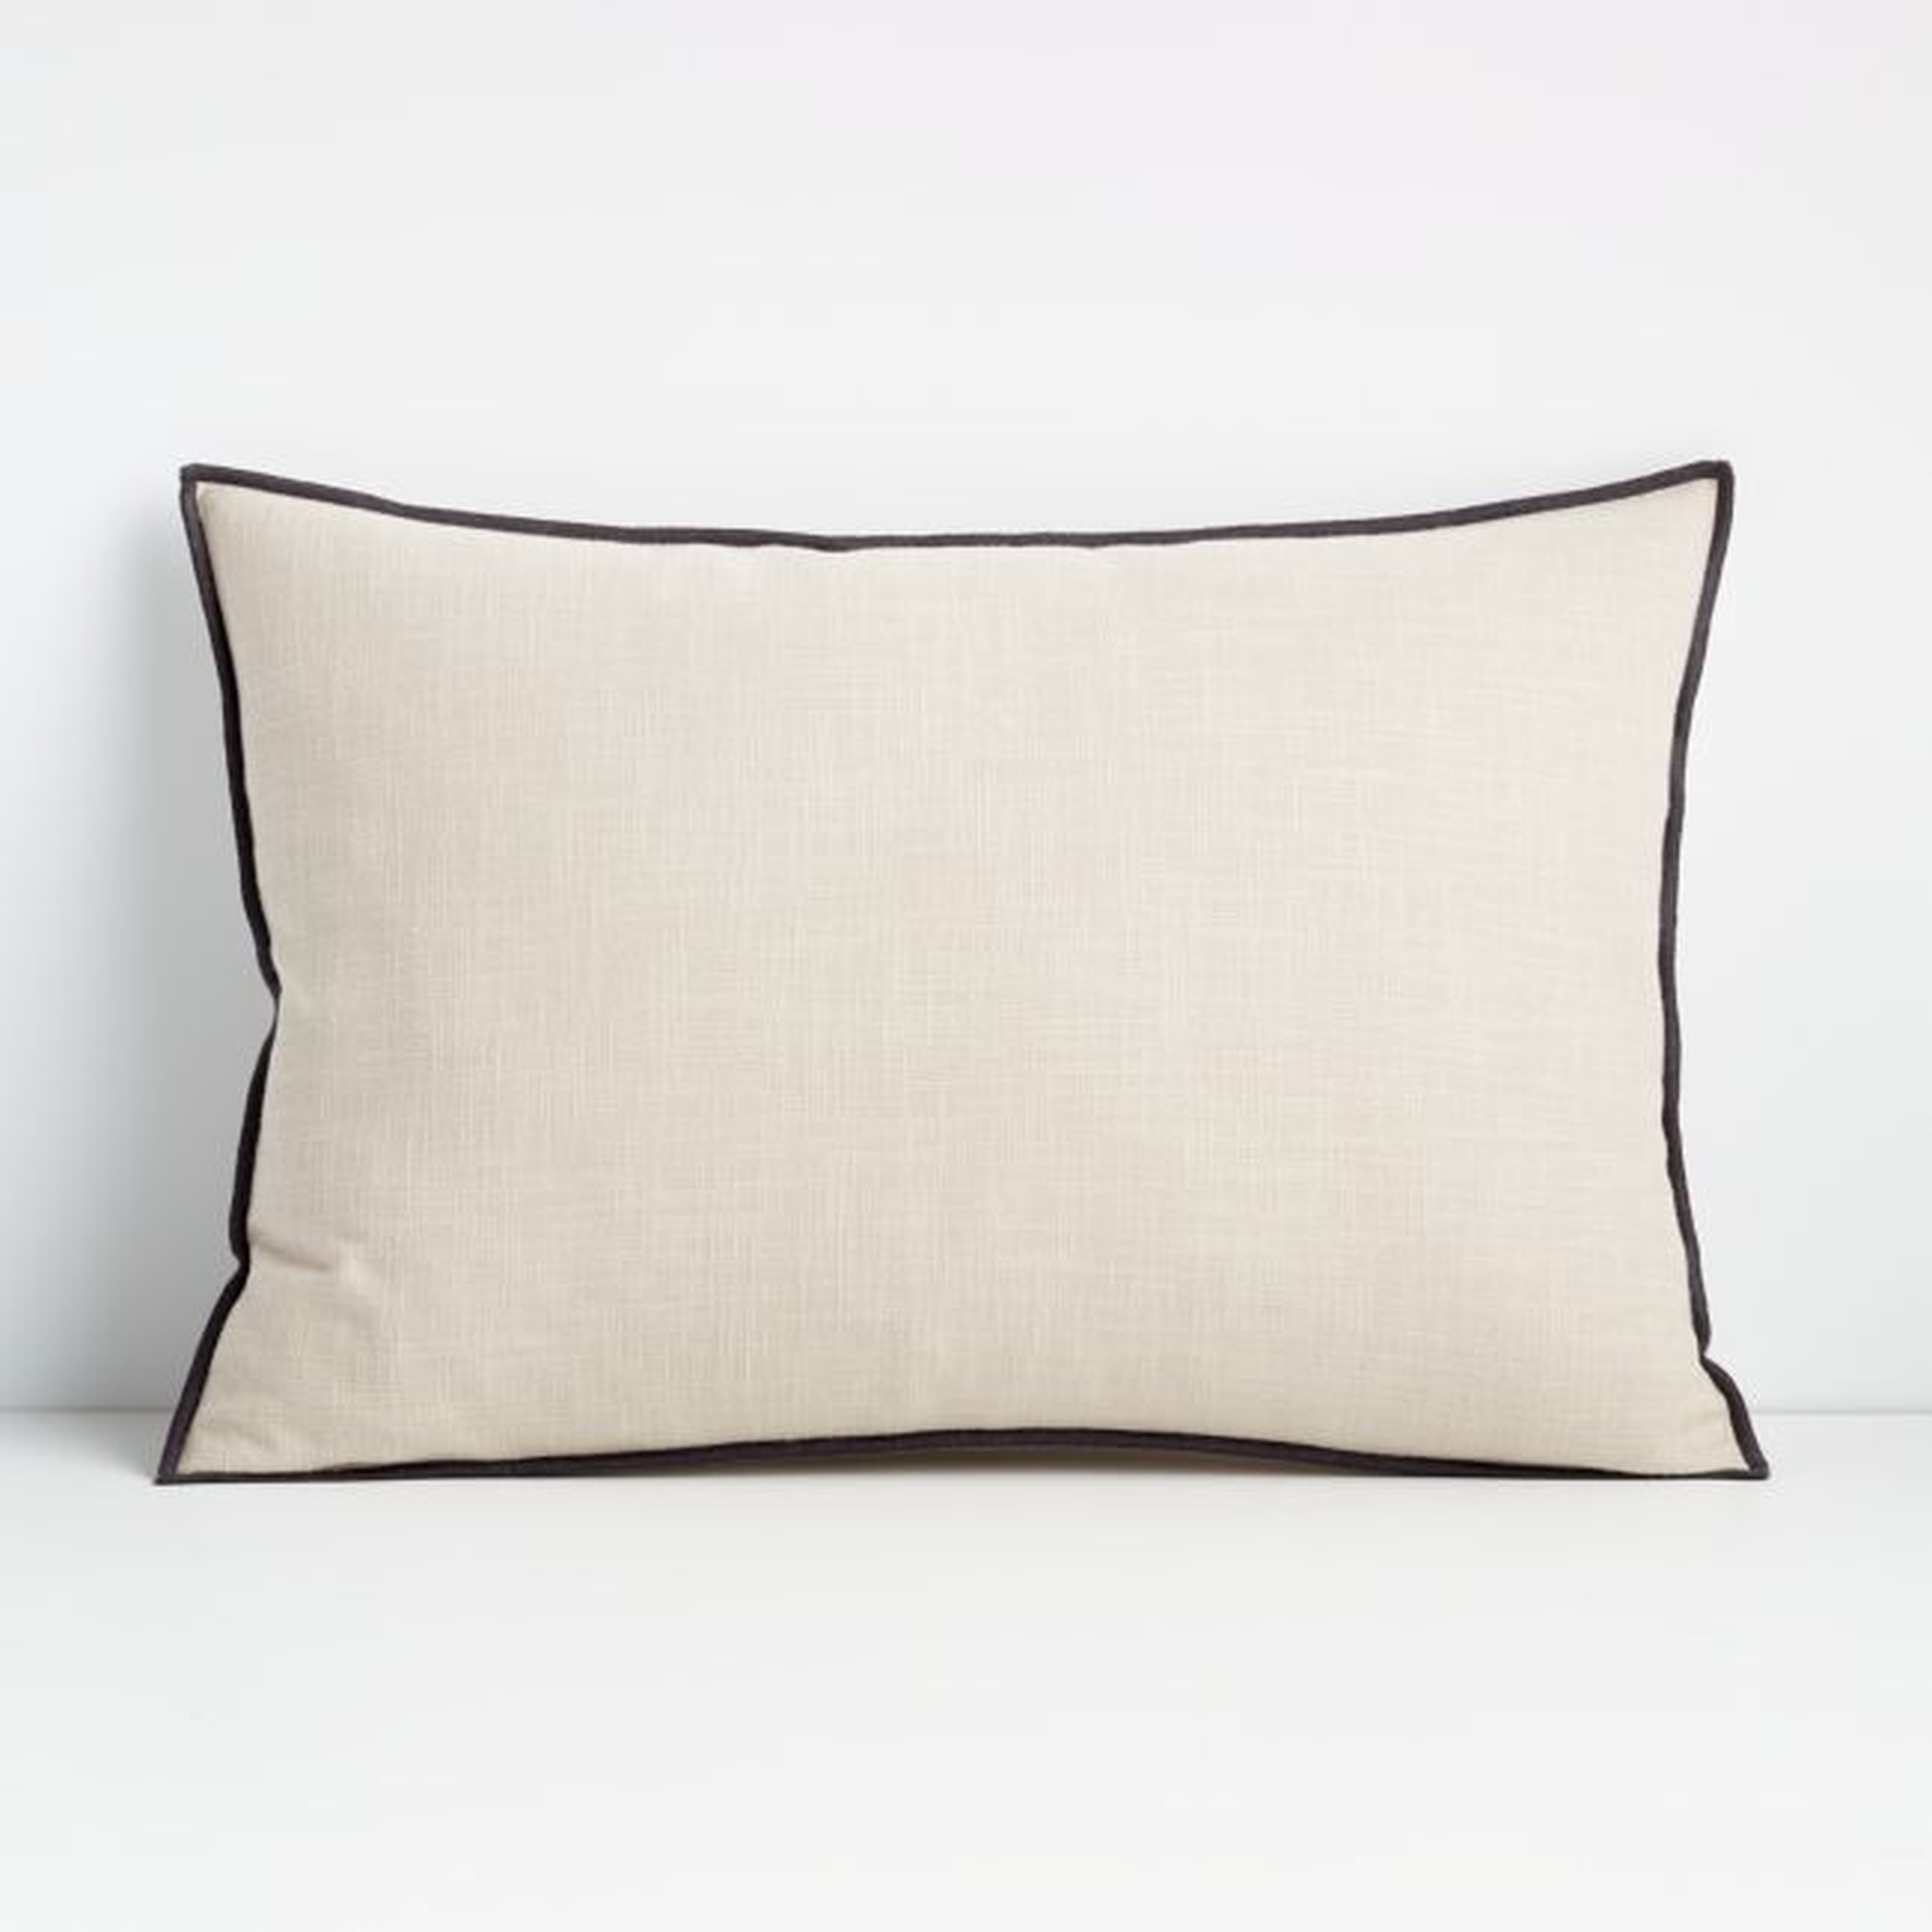 Moonbeam 22"x15" Merrow Stitch Cotton Throw Pillow with Down-Alternative Insert - Crate and Barrel